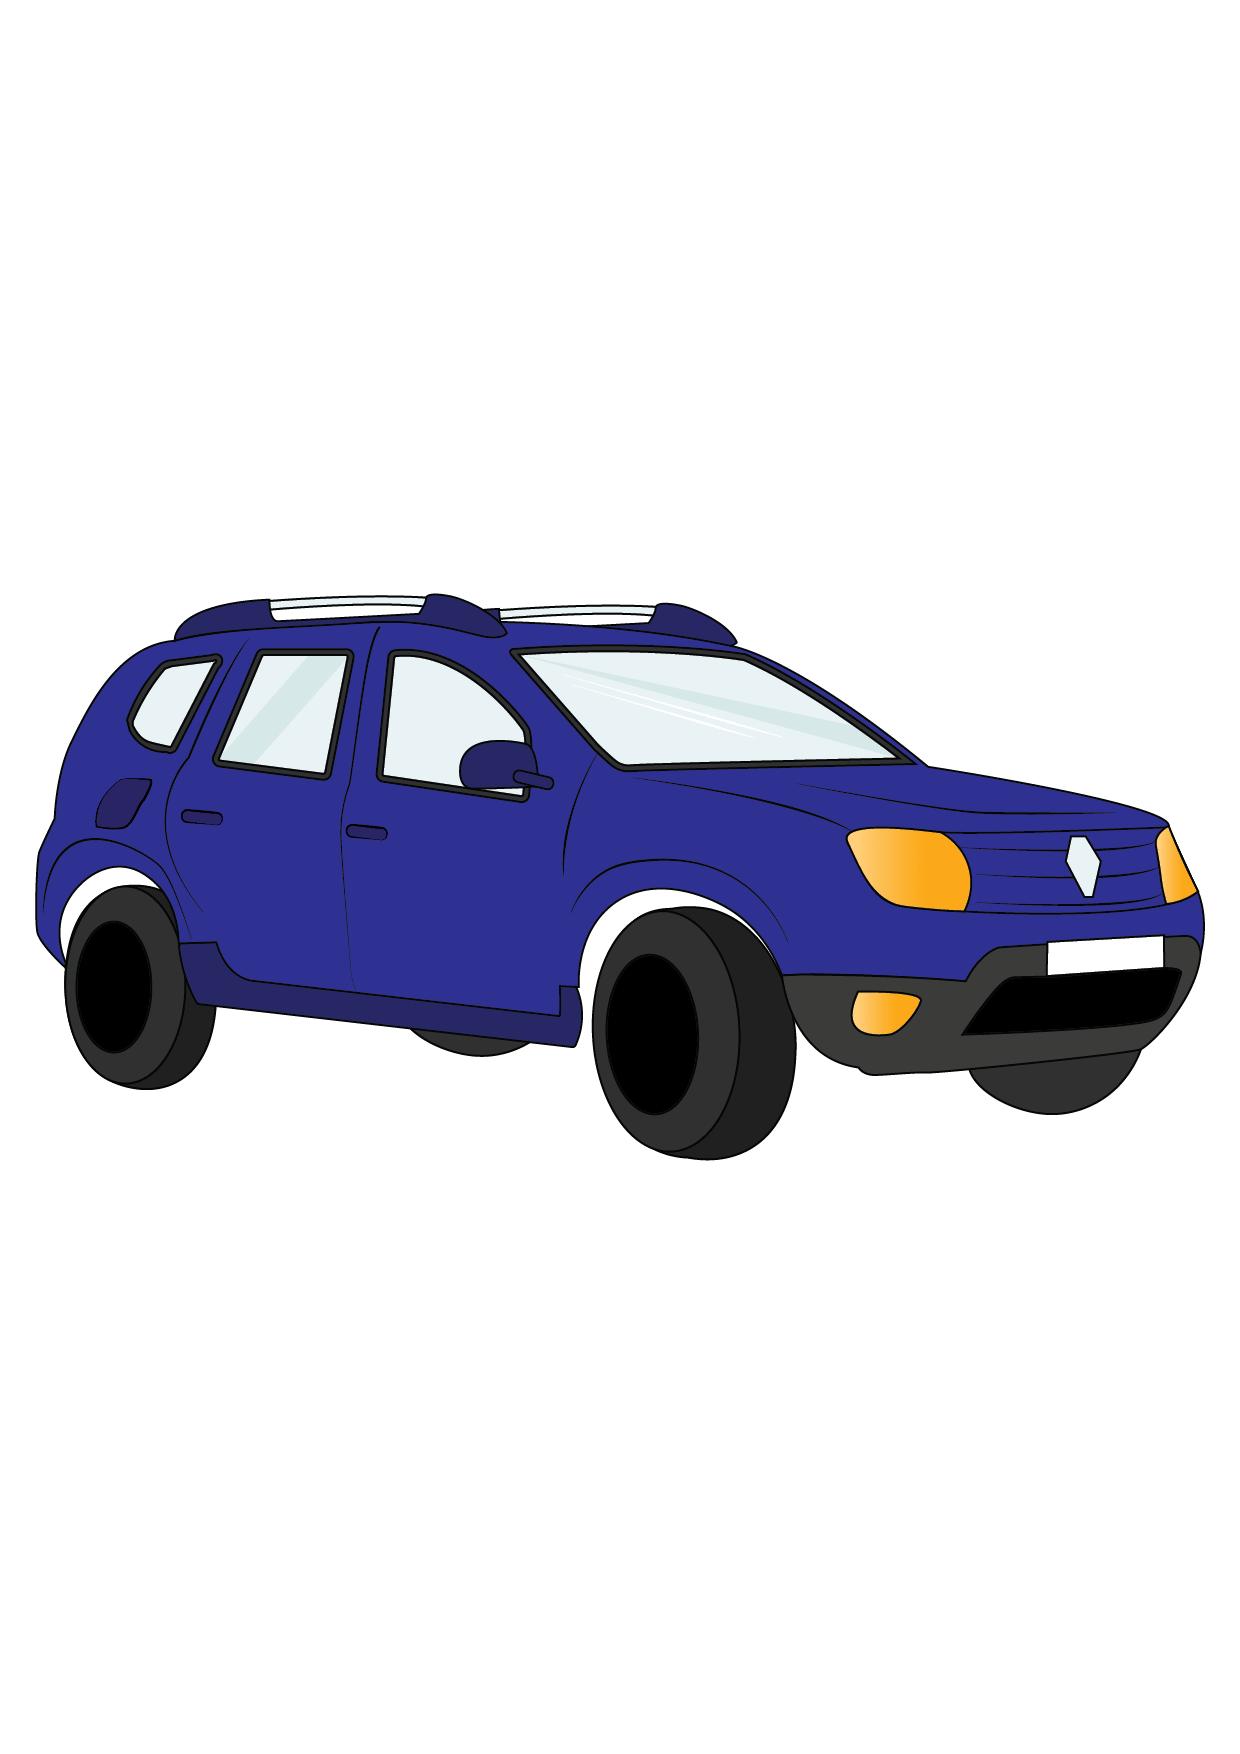 How to Draw A Car Step by Step Printable